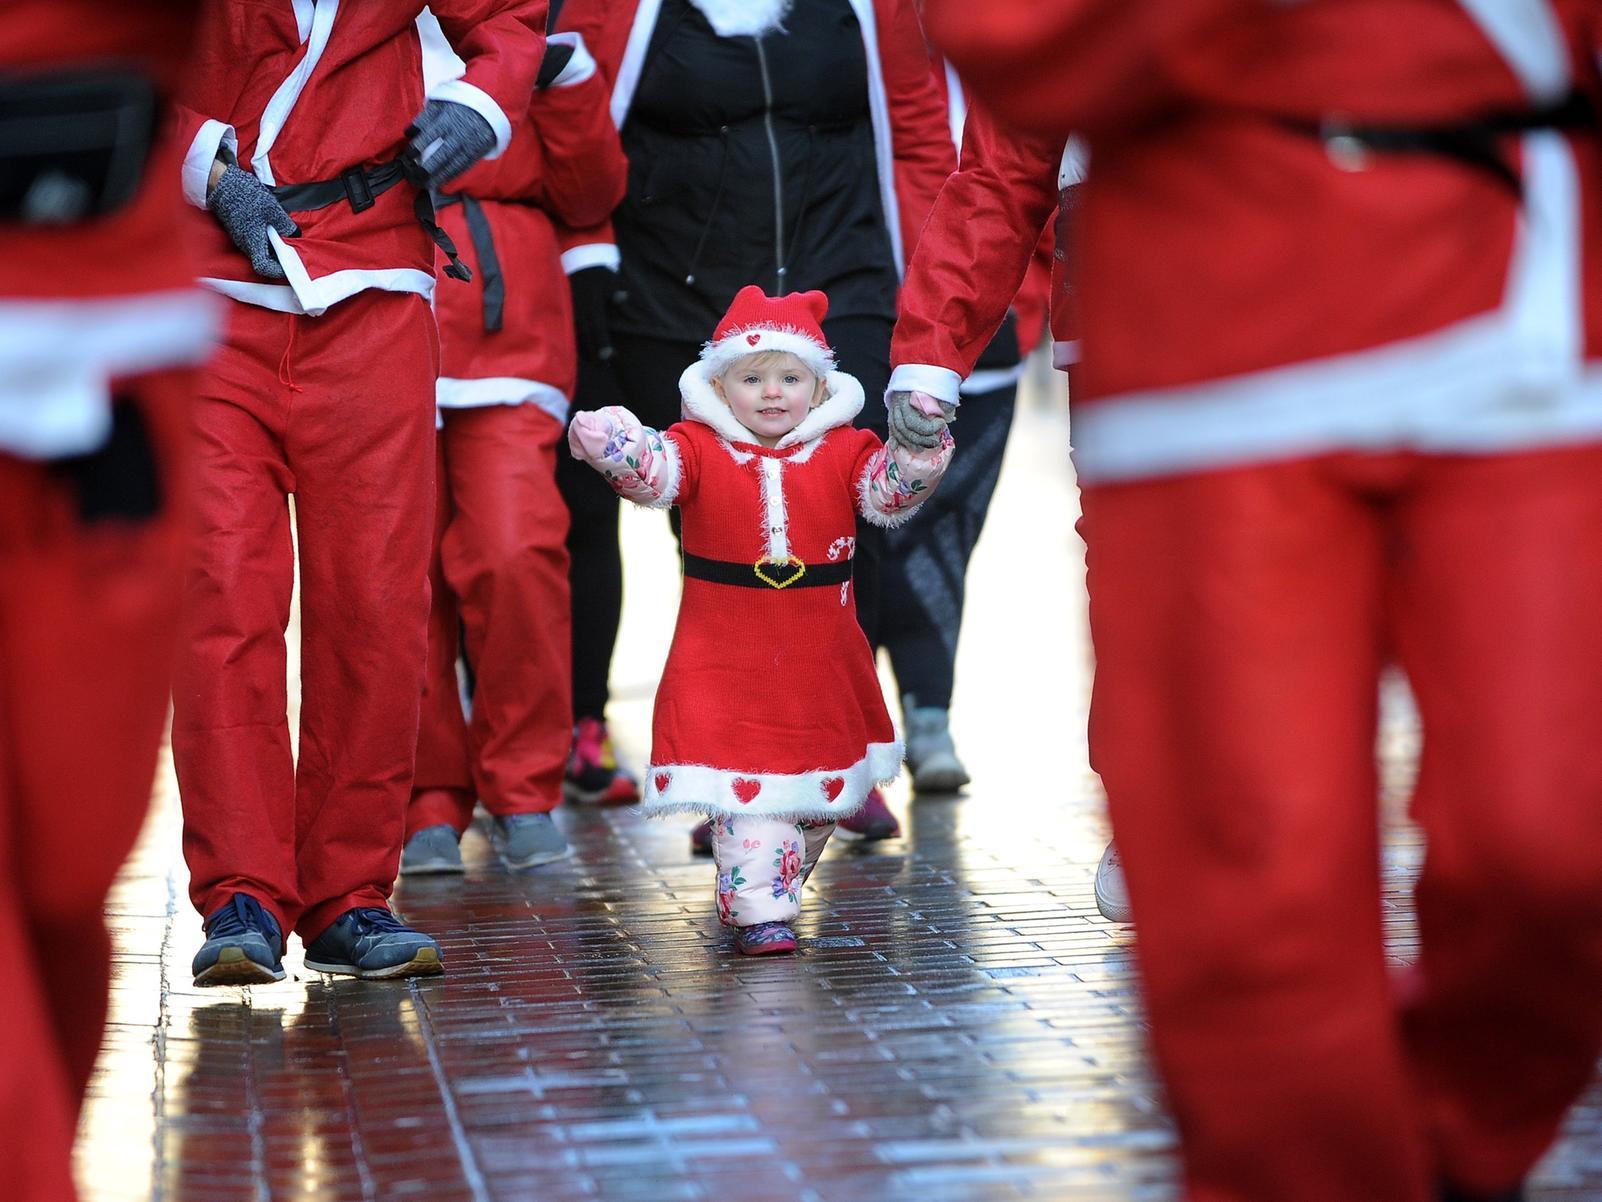 Best foot forward for this young Father Christmas at St Gemma's Santa Dash in Leeds city centre.